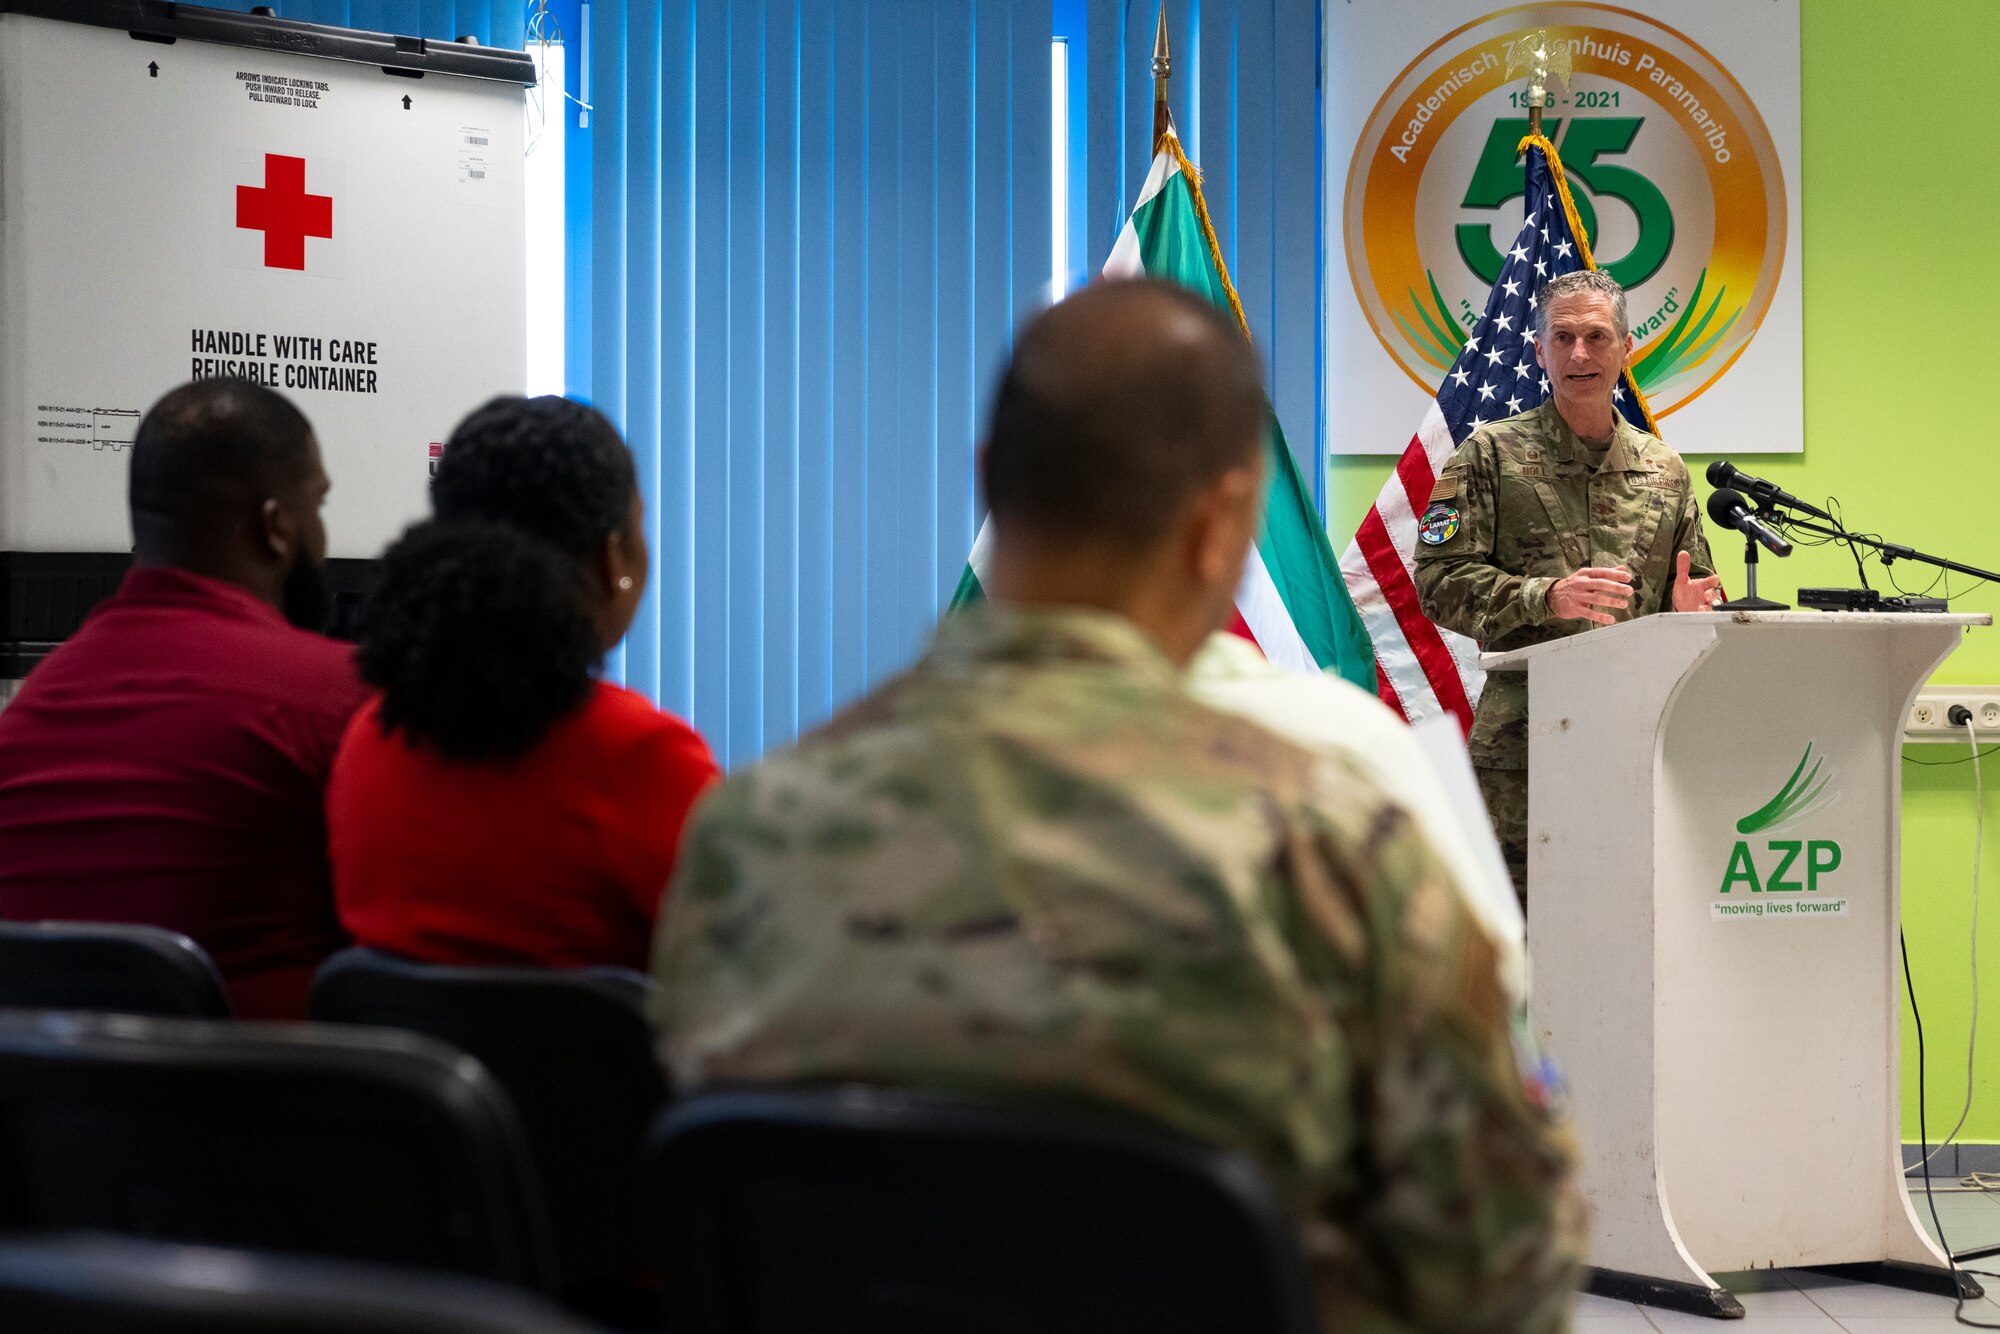 U.S. Air Force Col. Robert Noll, troop commander, gives remarks during a closing ceremony for the Lesser Antilles Medical Assistance Team mission at the Academic Hospital in Suriname, Feb. 28, 2024. The nearly two-week U.S. Southern Command backed operation helped approximately 1,500 patients and brought 159 hours of education and discussions through teaching seminars. (U.S. Air Force photo by Tech. Sgt. Rachel Maxwell)